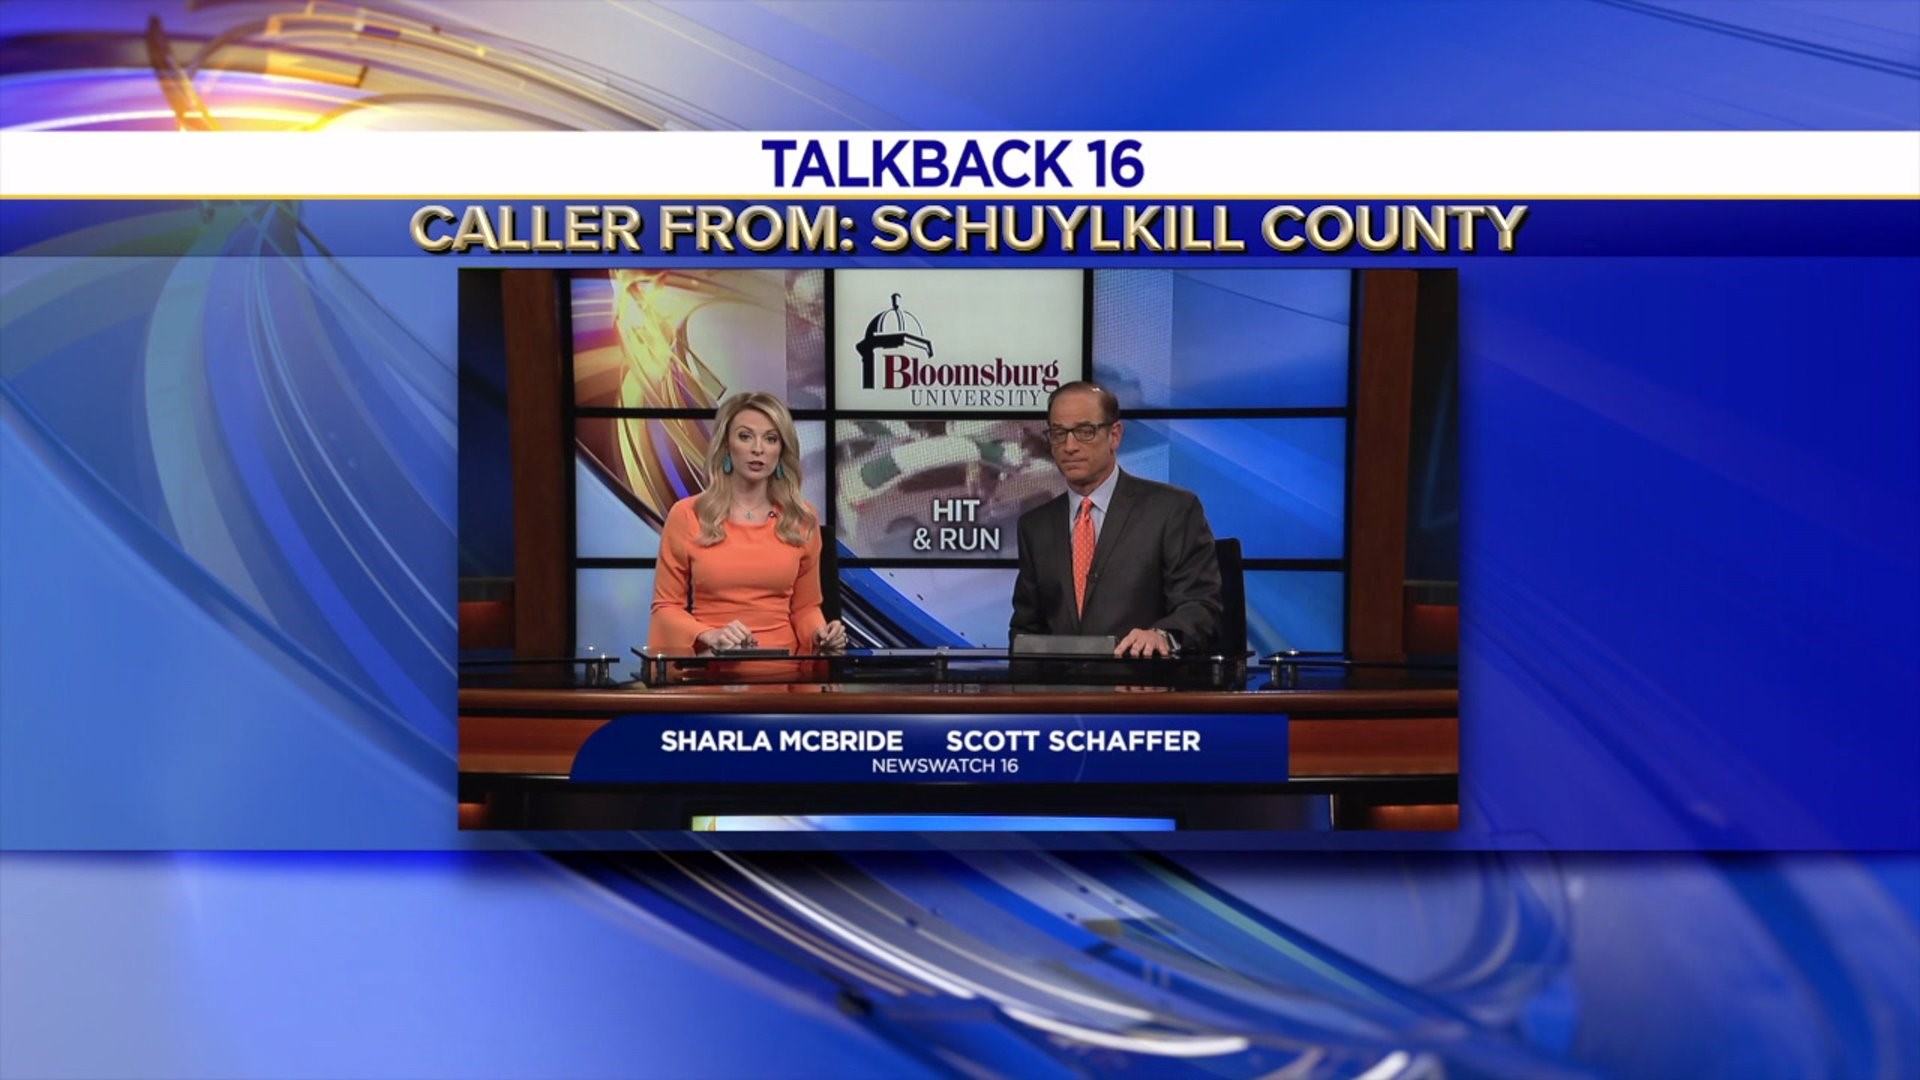 Scott Schaffer listens to your Talkback 16 calls and gives you a little feedback.